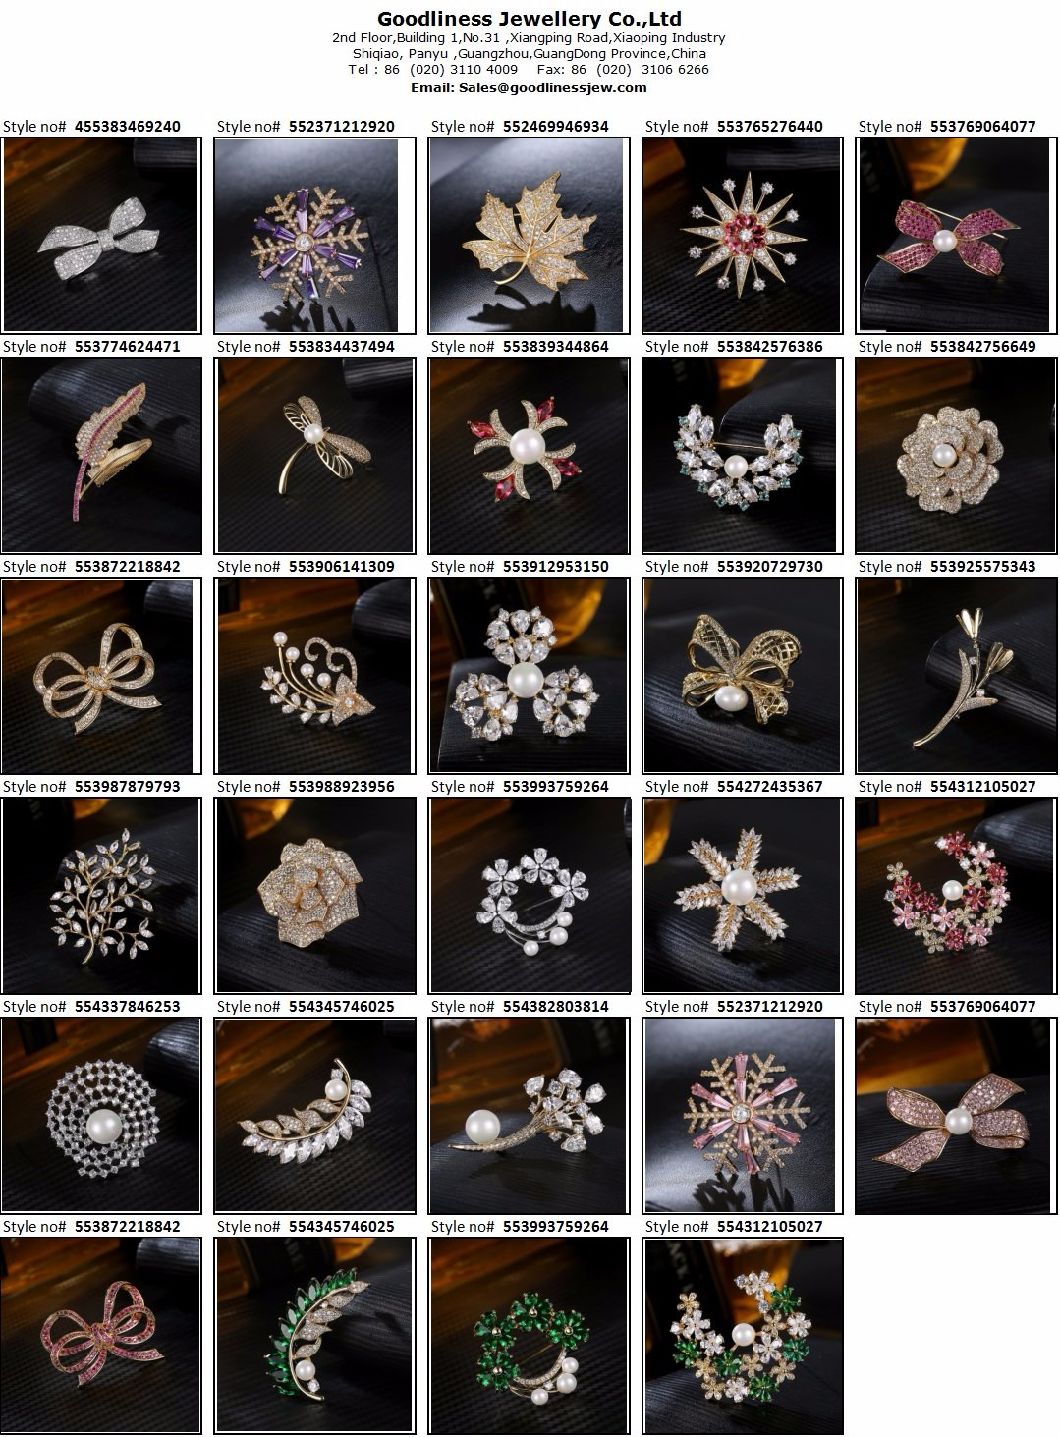 Fashion Snowflake Brooch for Women Party /Daily Use Brooch Jewelry